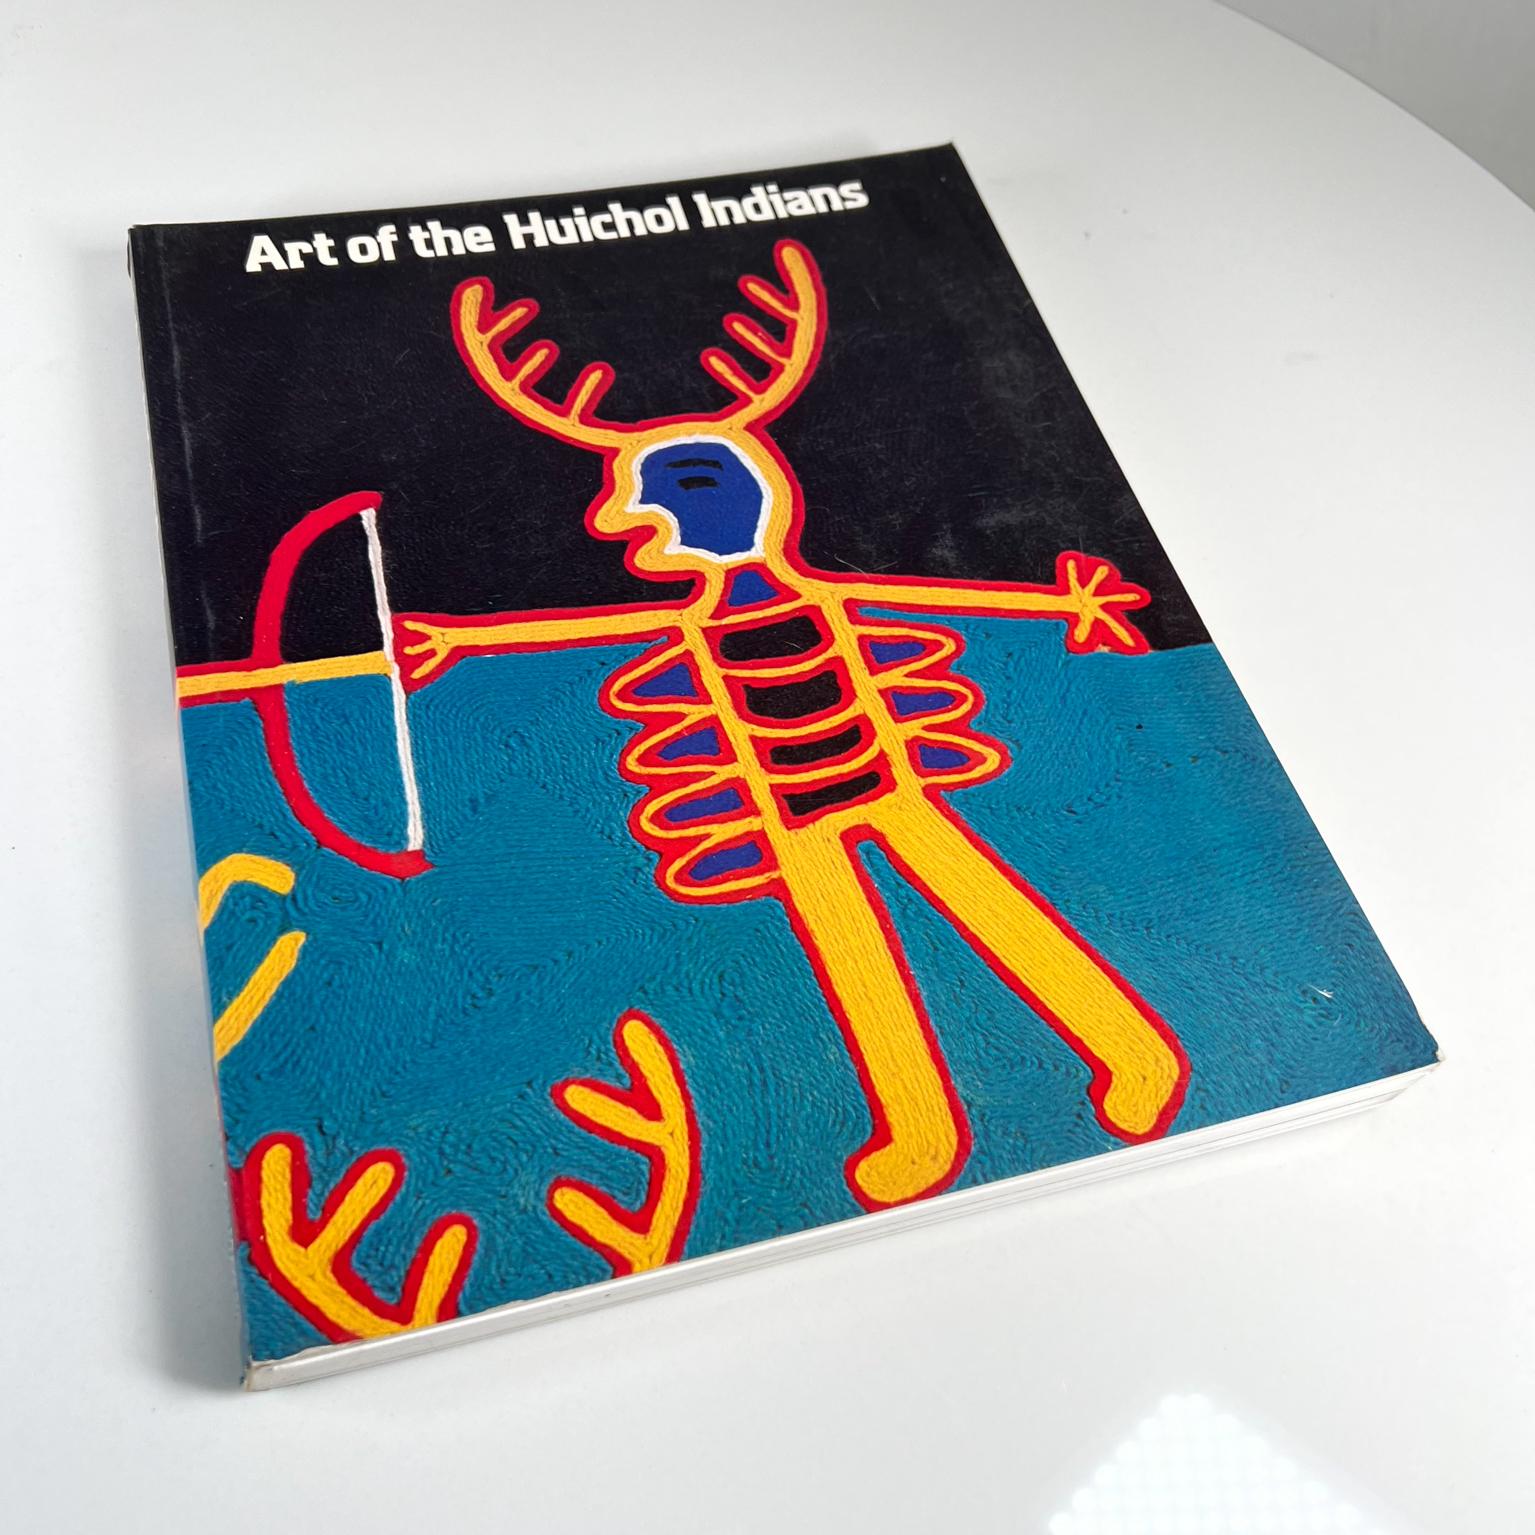 Art of the Huichol Indians 

1978 Fine Arts Museums San Francisco
Published by Harry N. Abrams New York
Soft cover.
Measures: 8.75 x 11 tall x .63
Printed and bound in Japan
Preowned vintage condition.
Refer to images.


